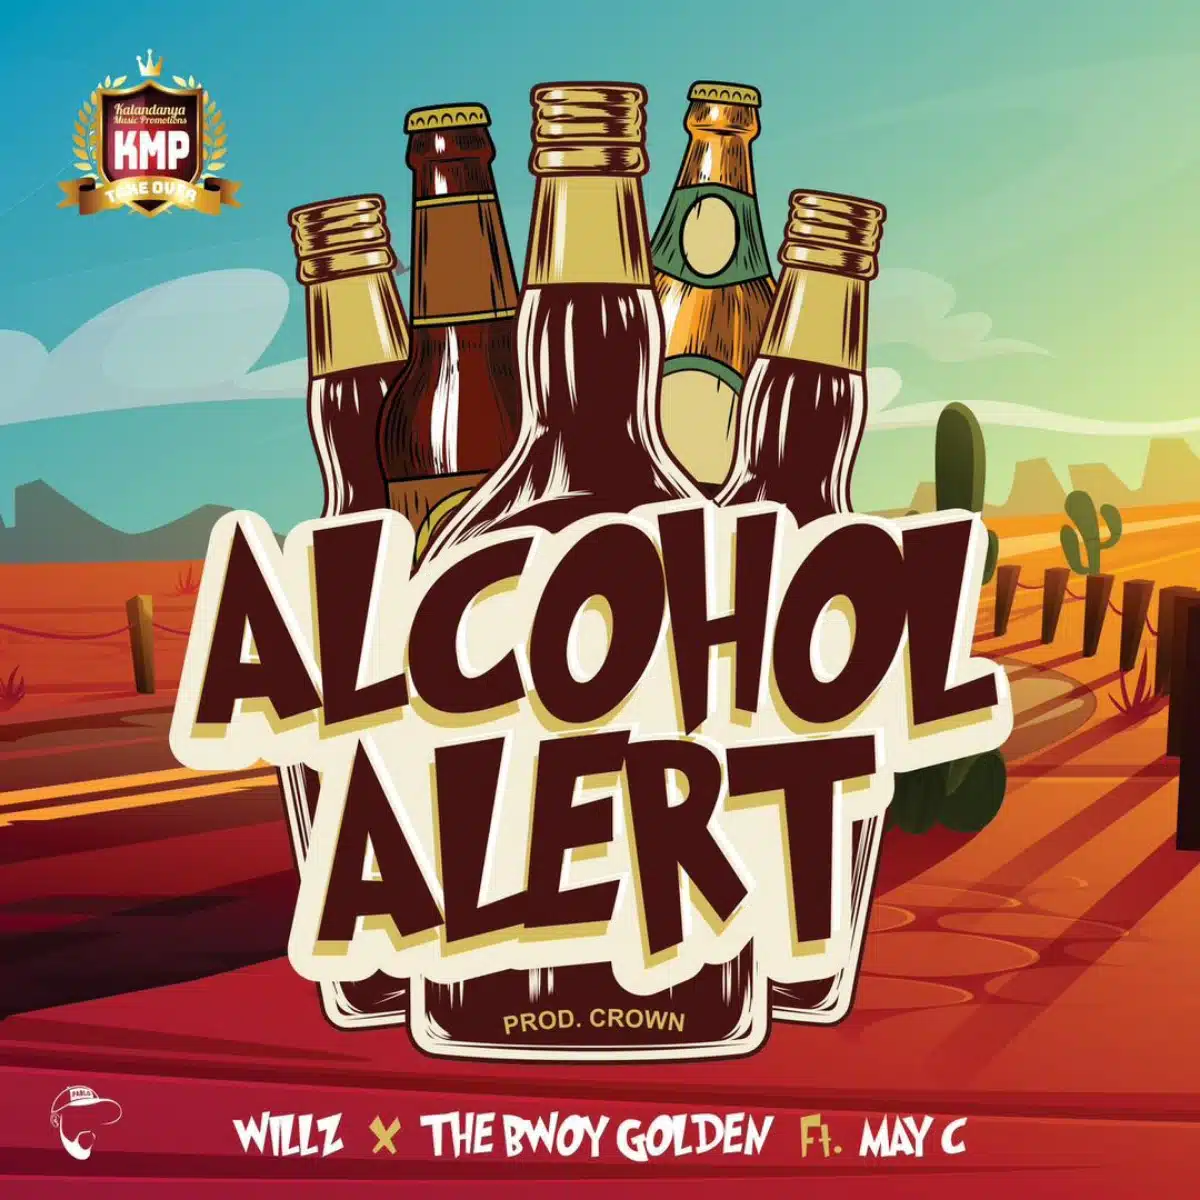 DOWNLOAD: Willz Ft The Bwoy Golden & May C – “Alcohol Alert” Mp3